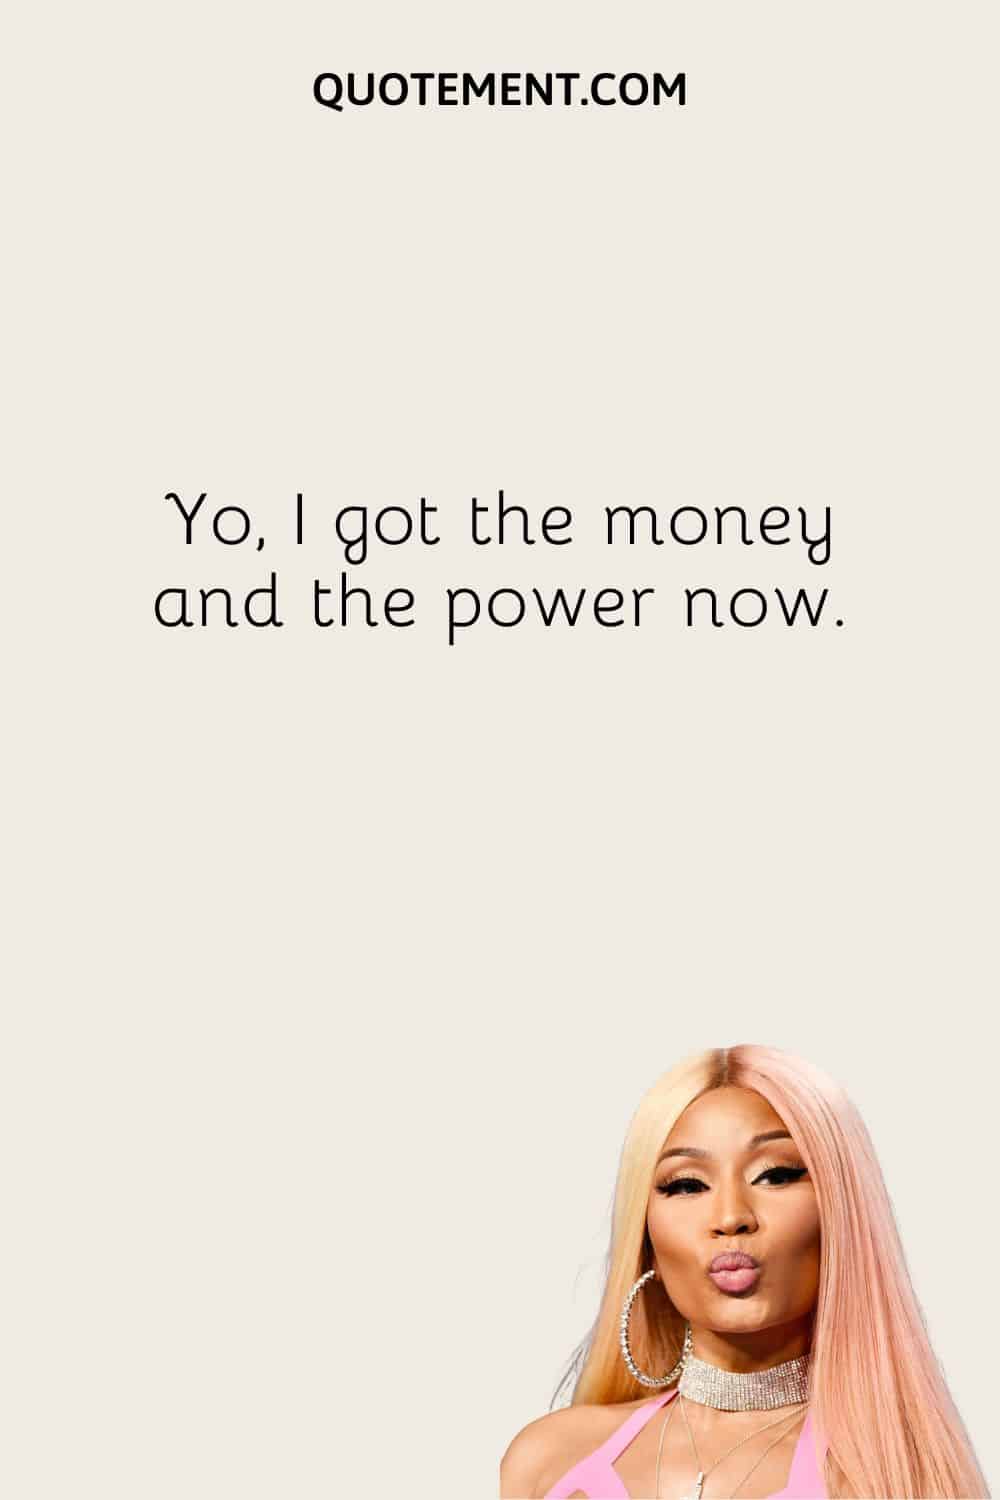 Yo, I got the money and the power now